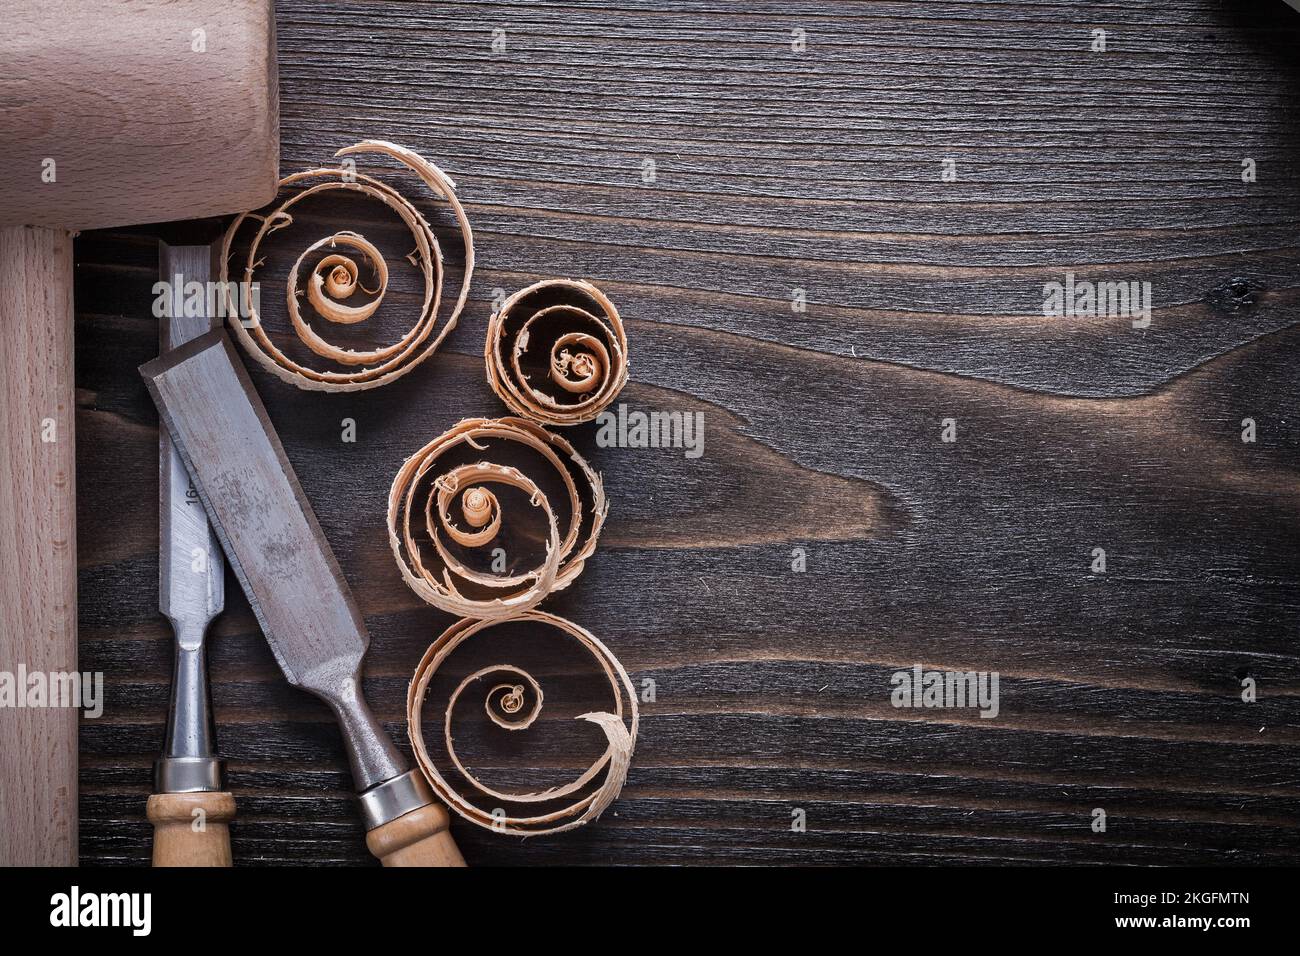 Wooden hammer flat chisels and curled up shavings on vintage wood board copy space image construction concept. Stock Photo